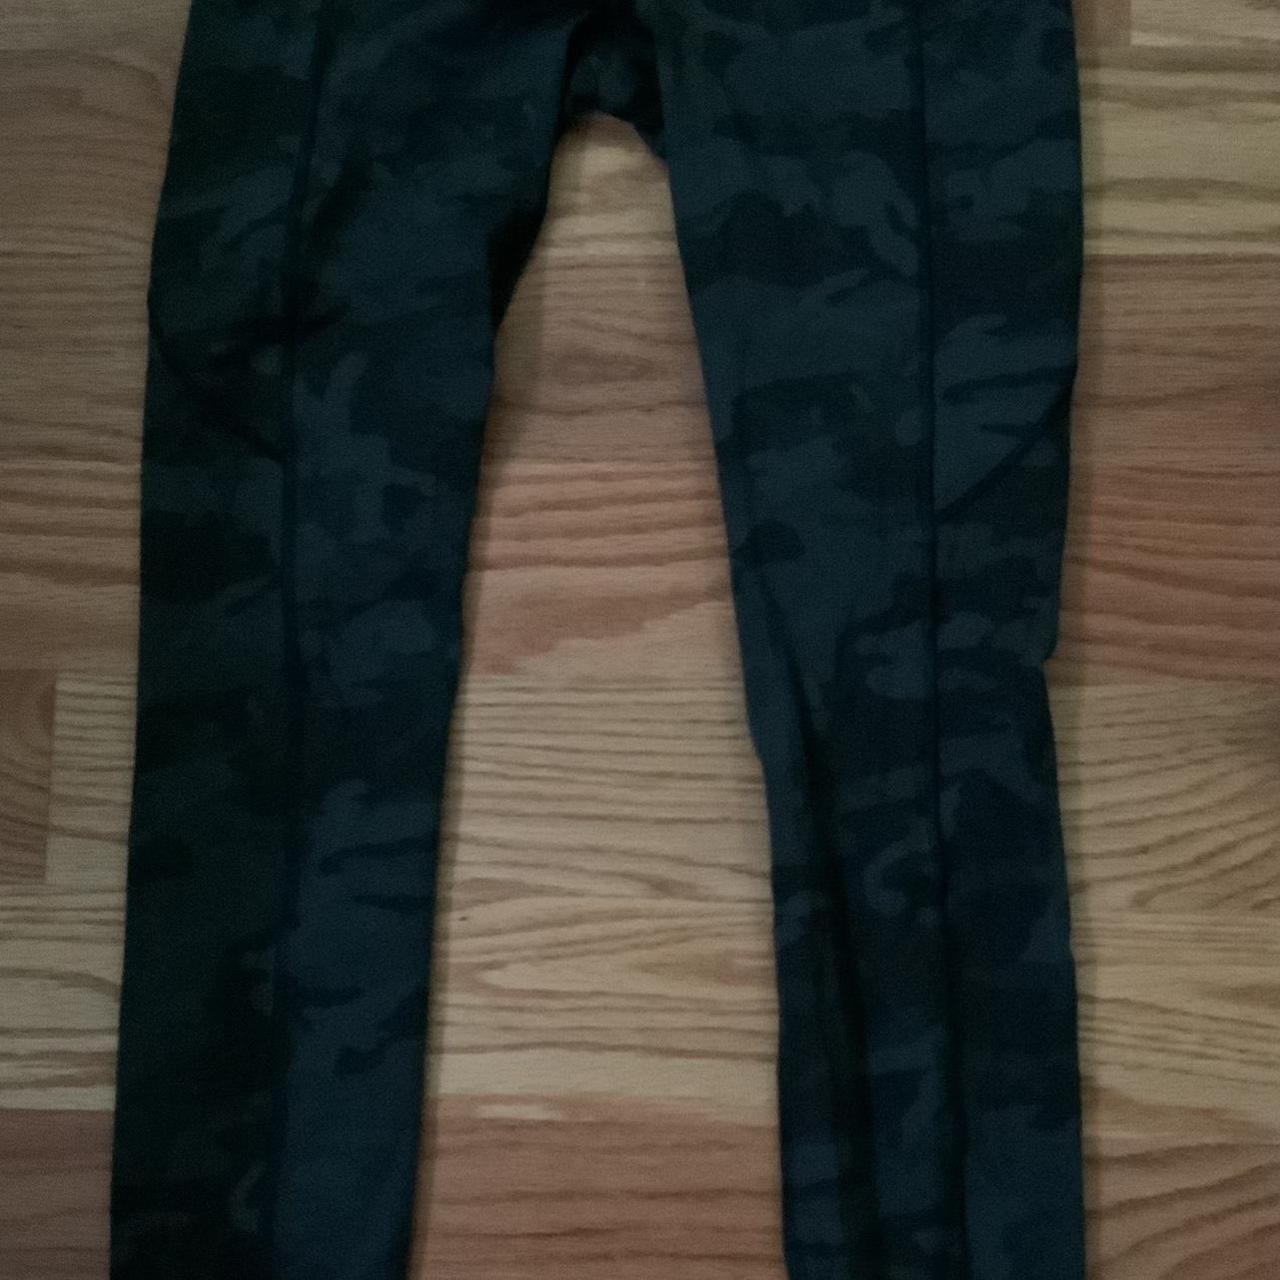 grey camo fast and free high rise tight size 4 25... - Depop